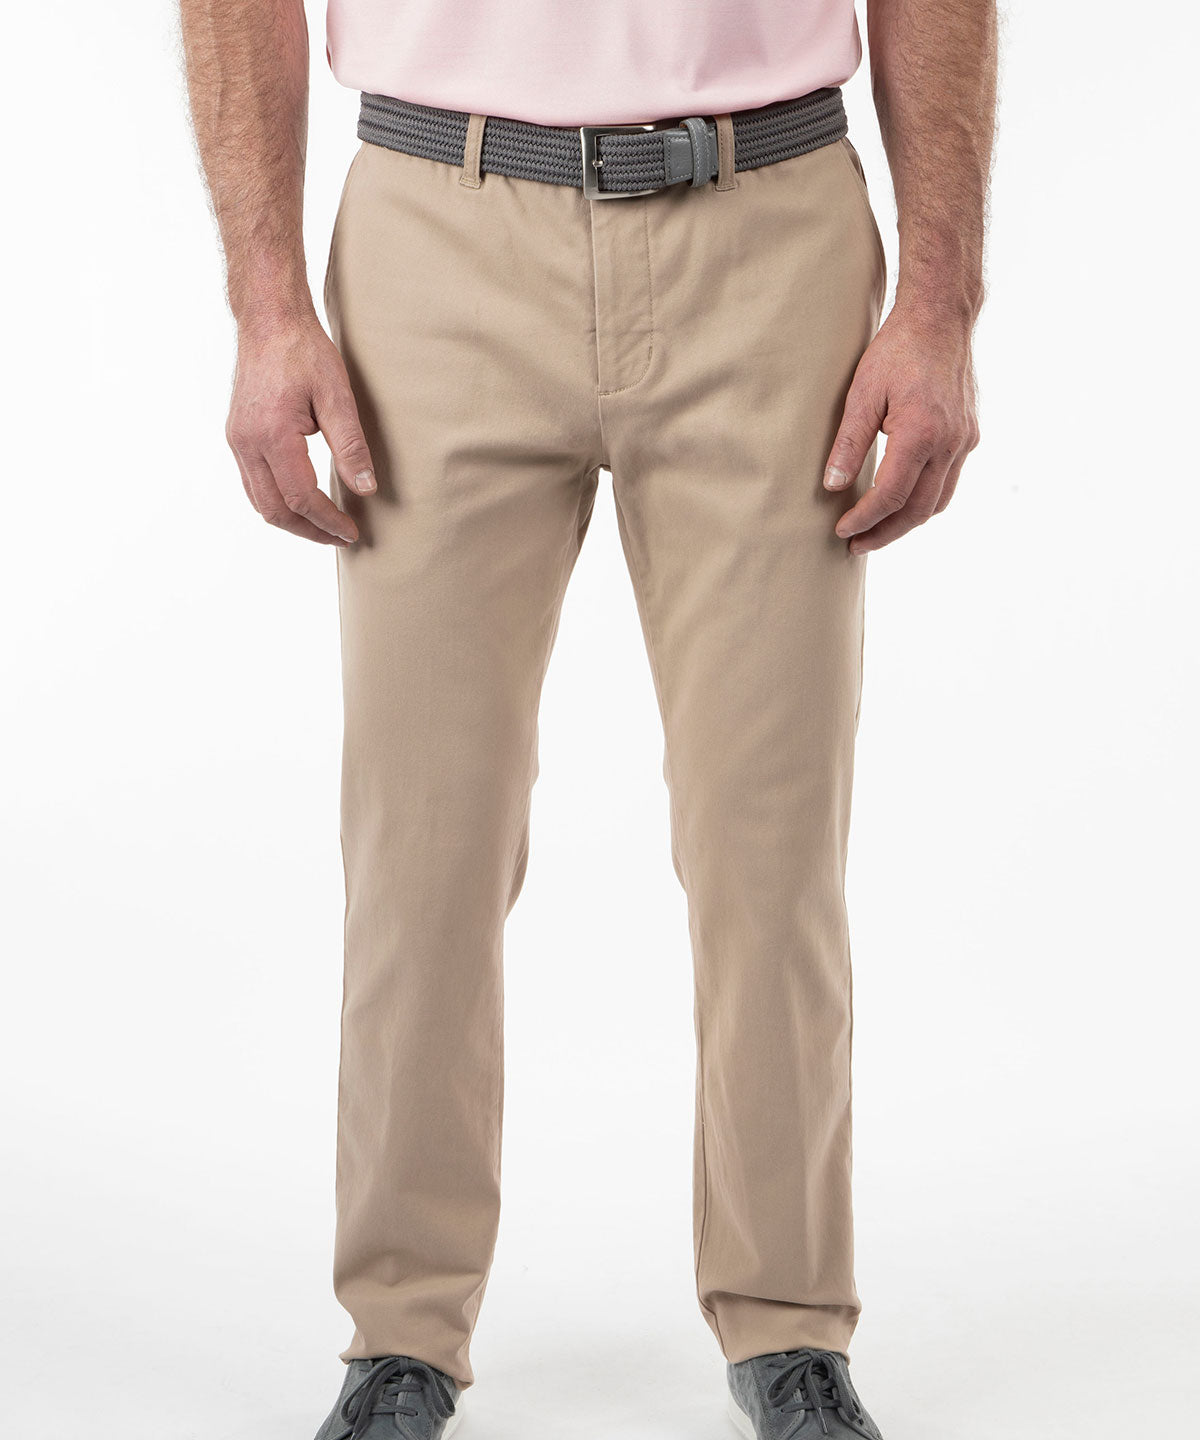 Signature St. Charles 2.0 Brushed Cotton Stretch Dress Pants